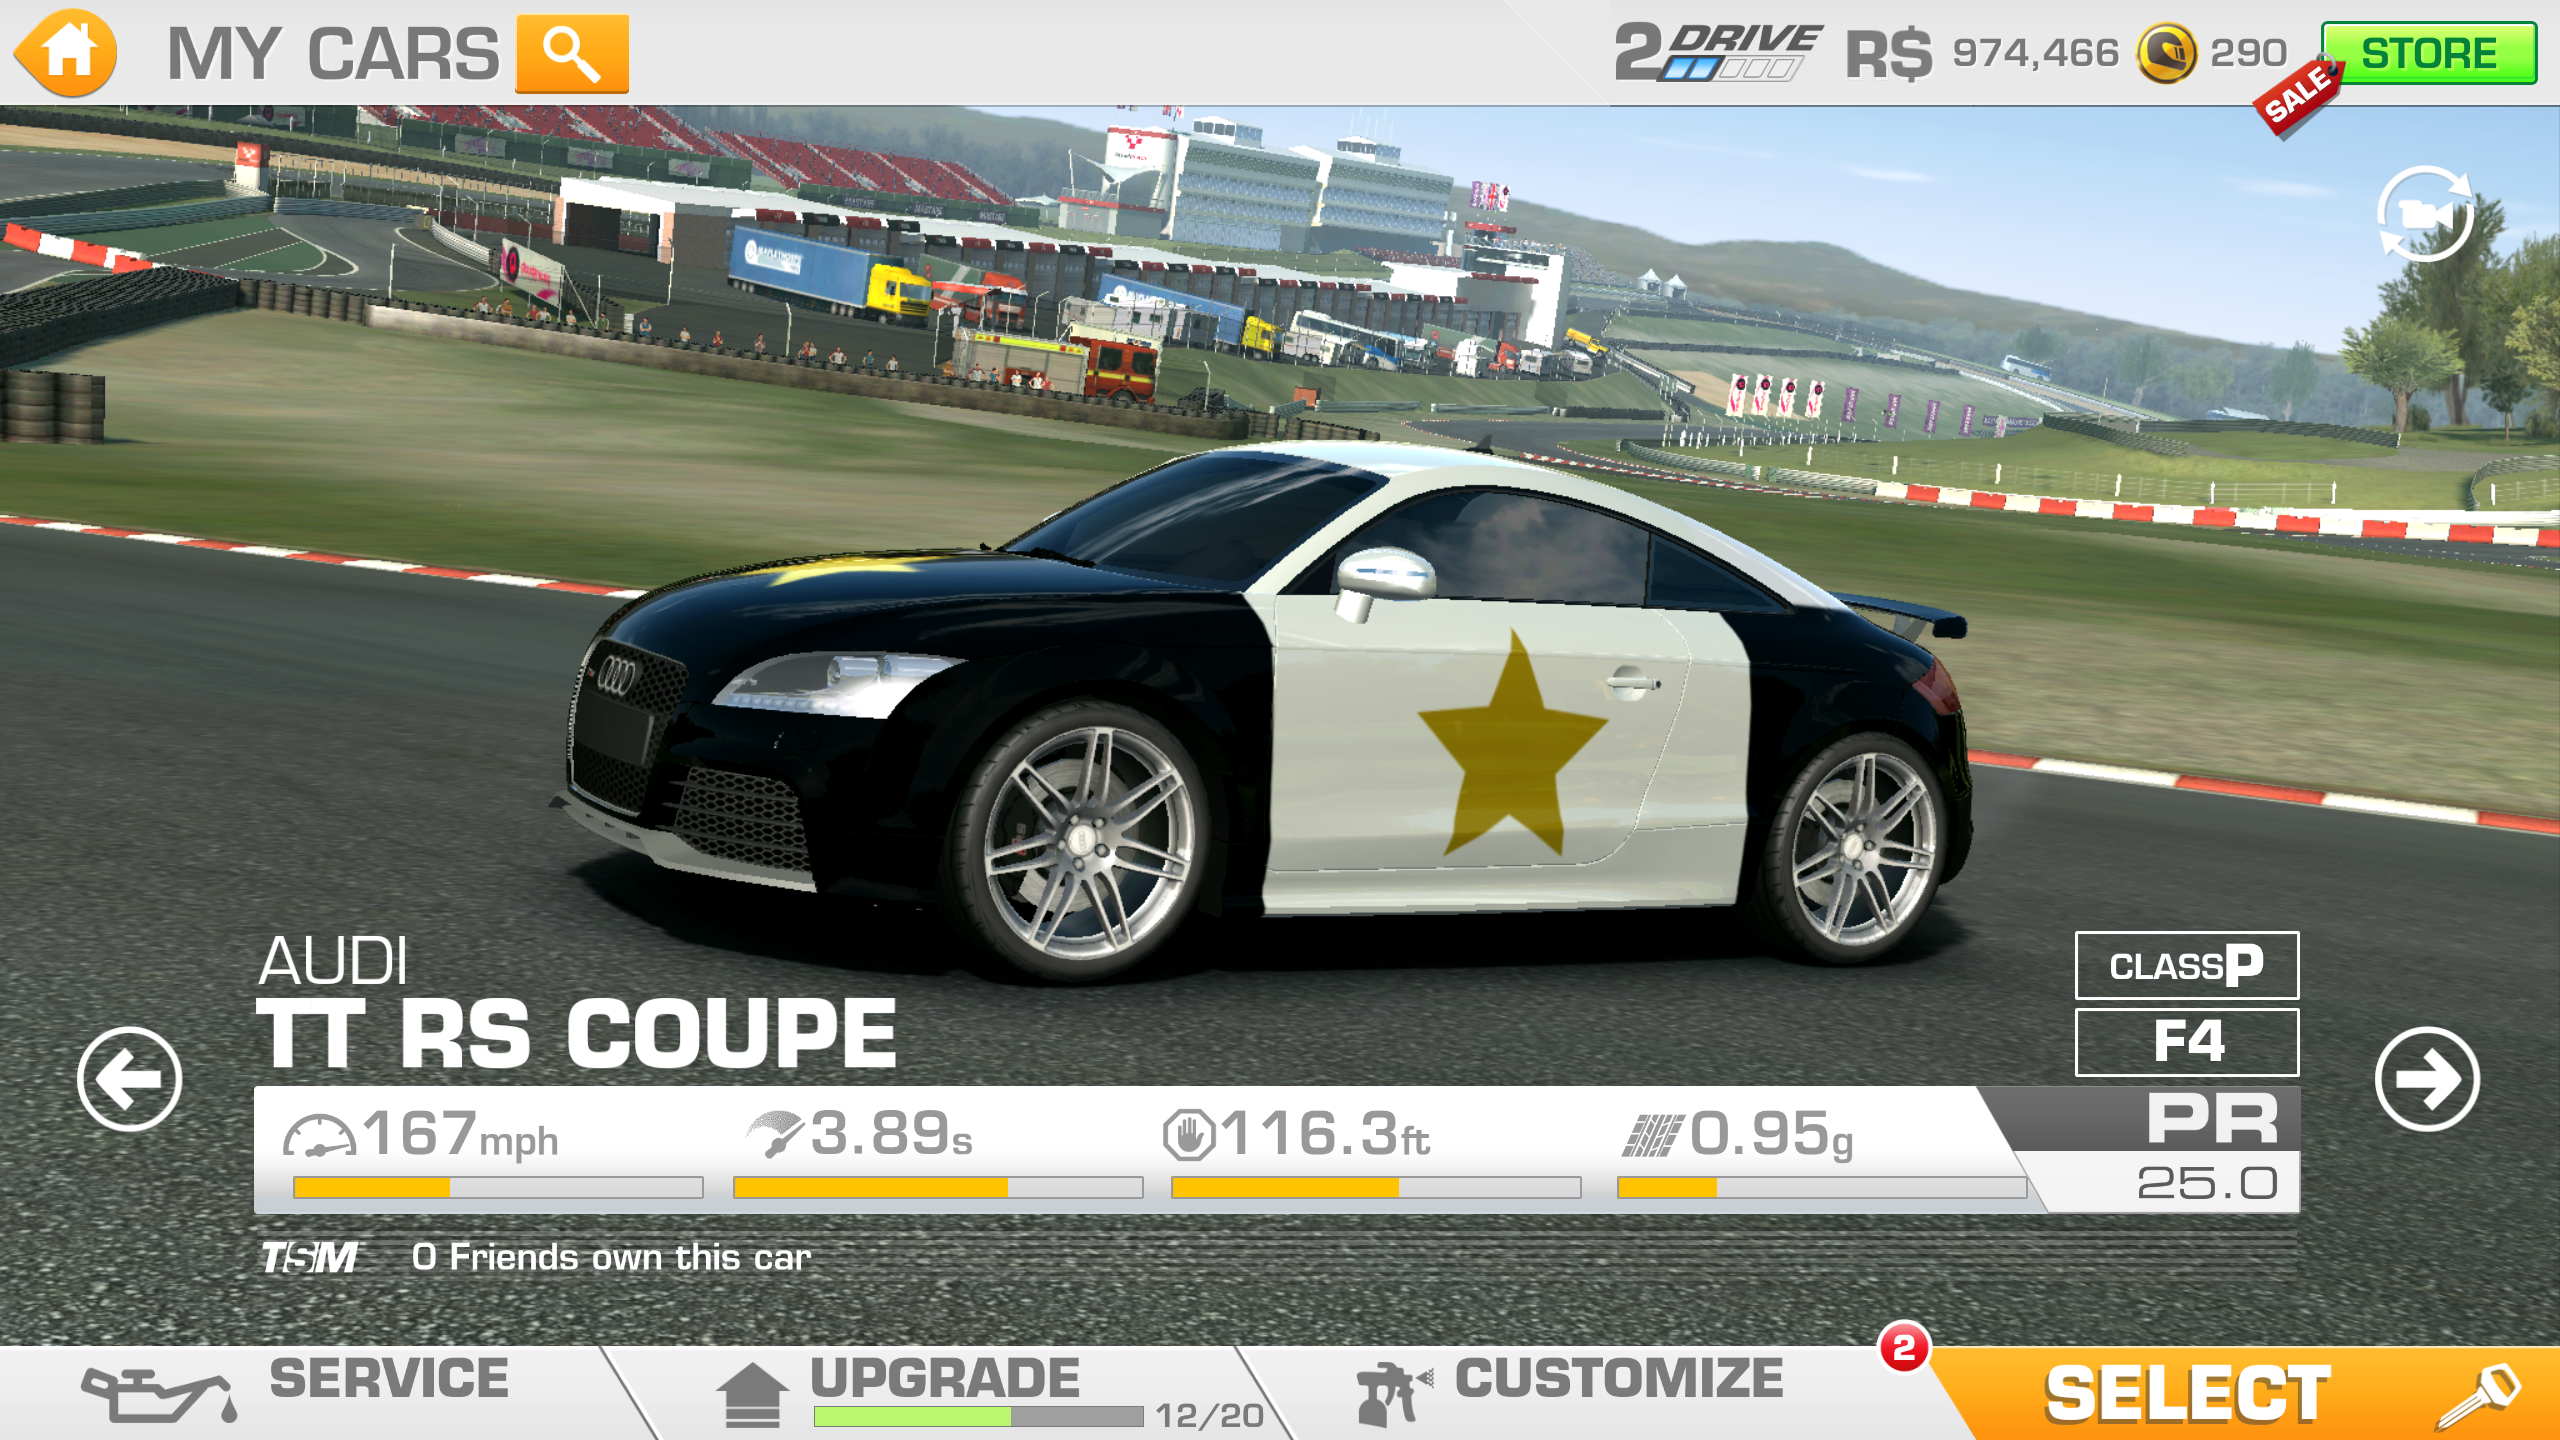 Audi TT RS Coupe Sheriff Edition